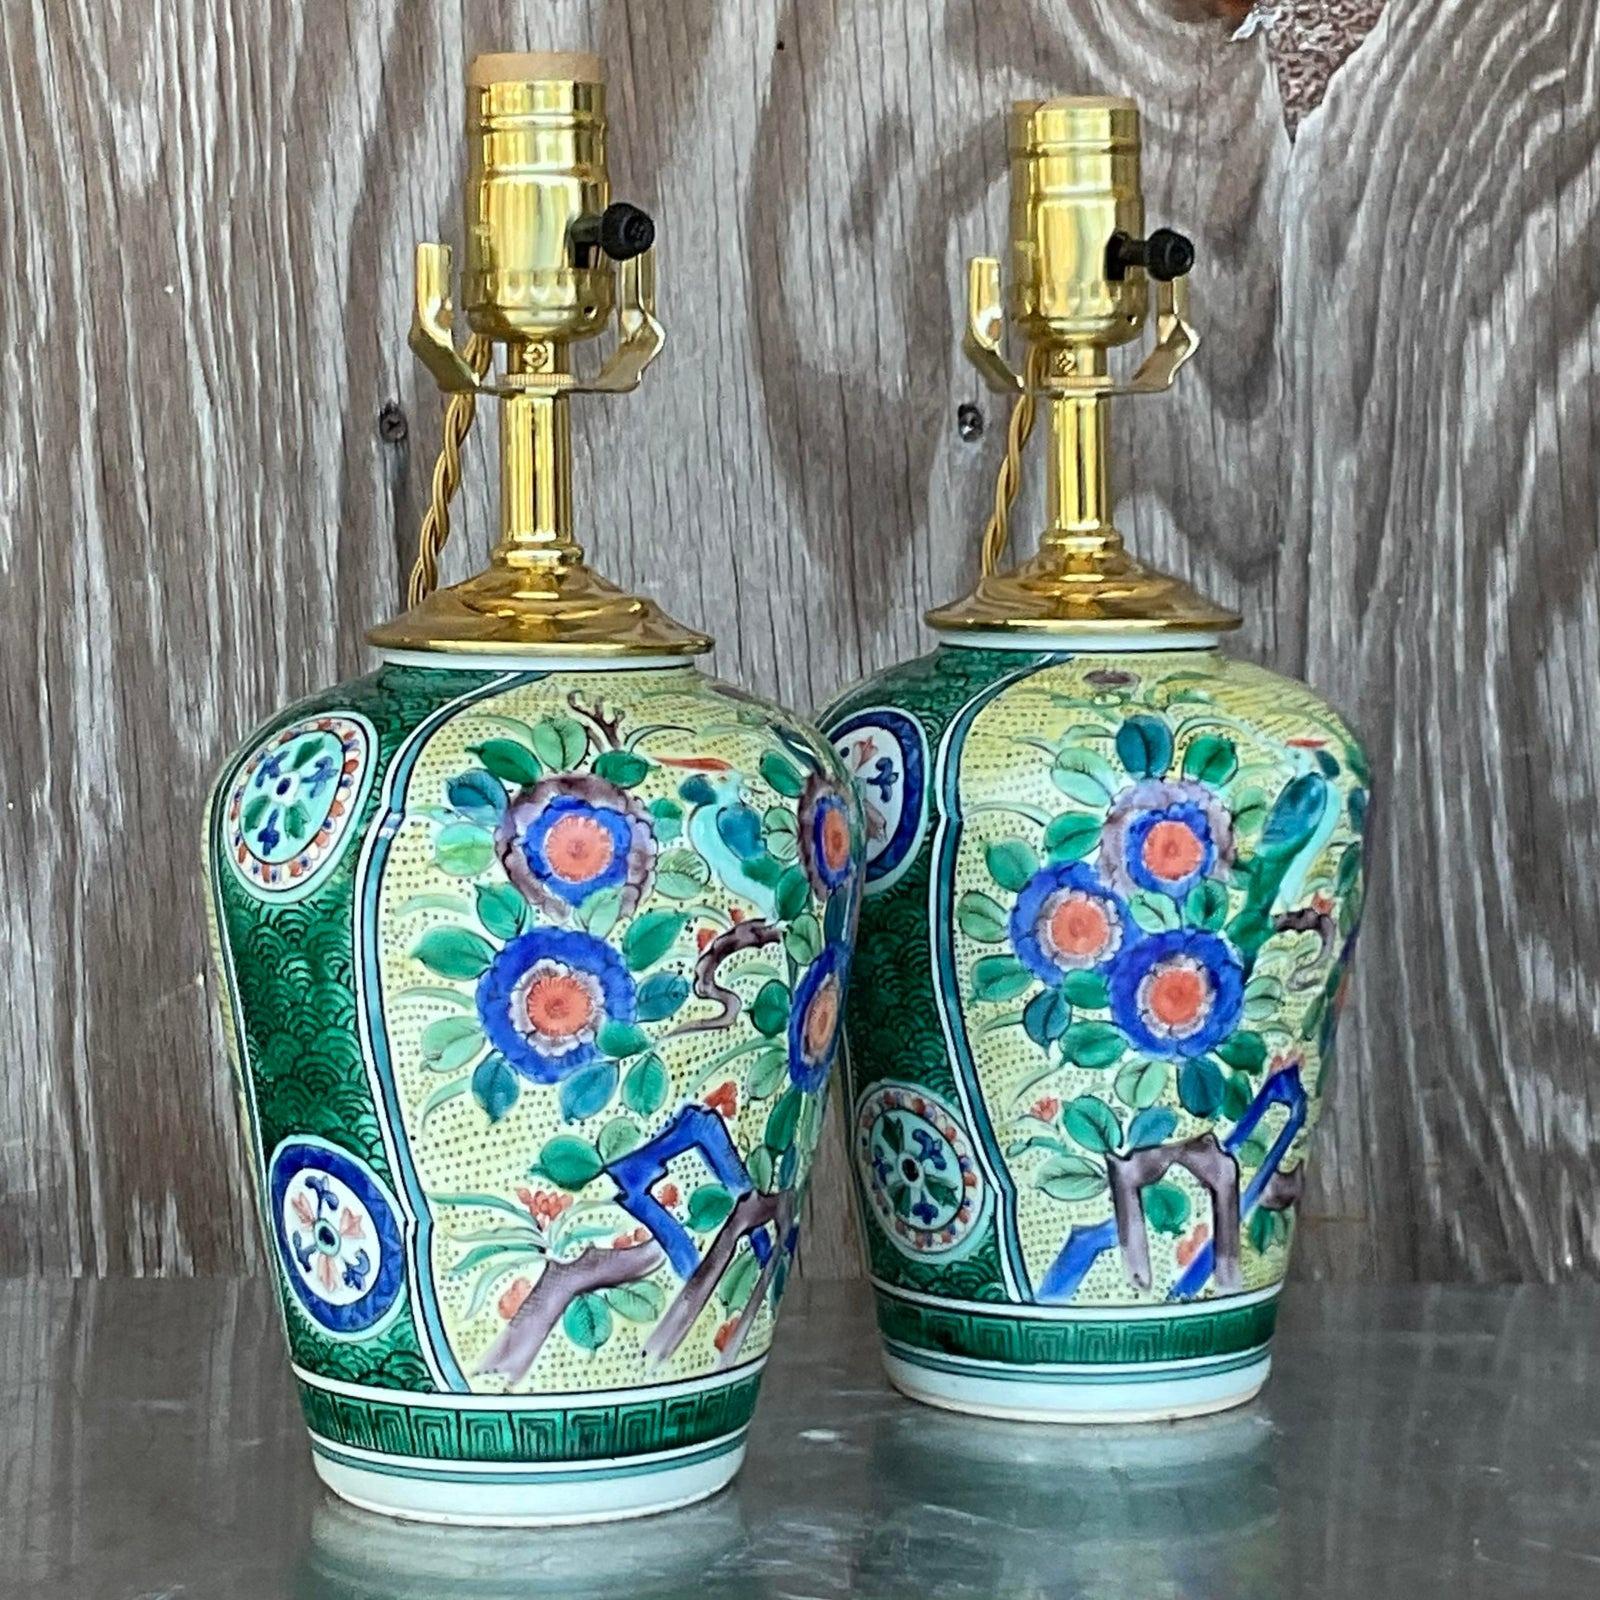 Vintage Asian Glazed Ceramic Floral Table Lamps - a Pair For Sale 3